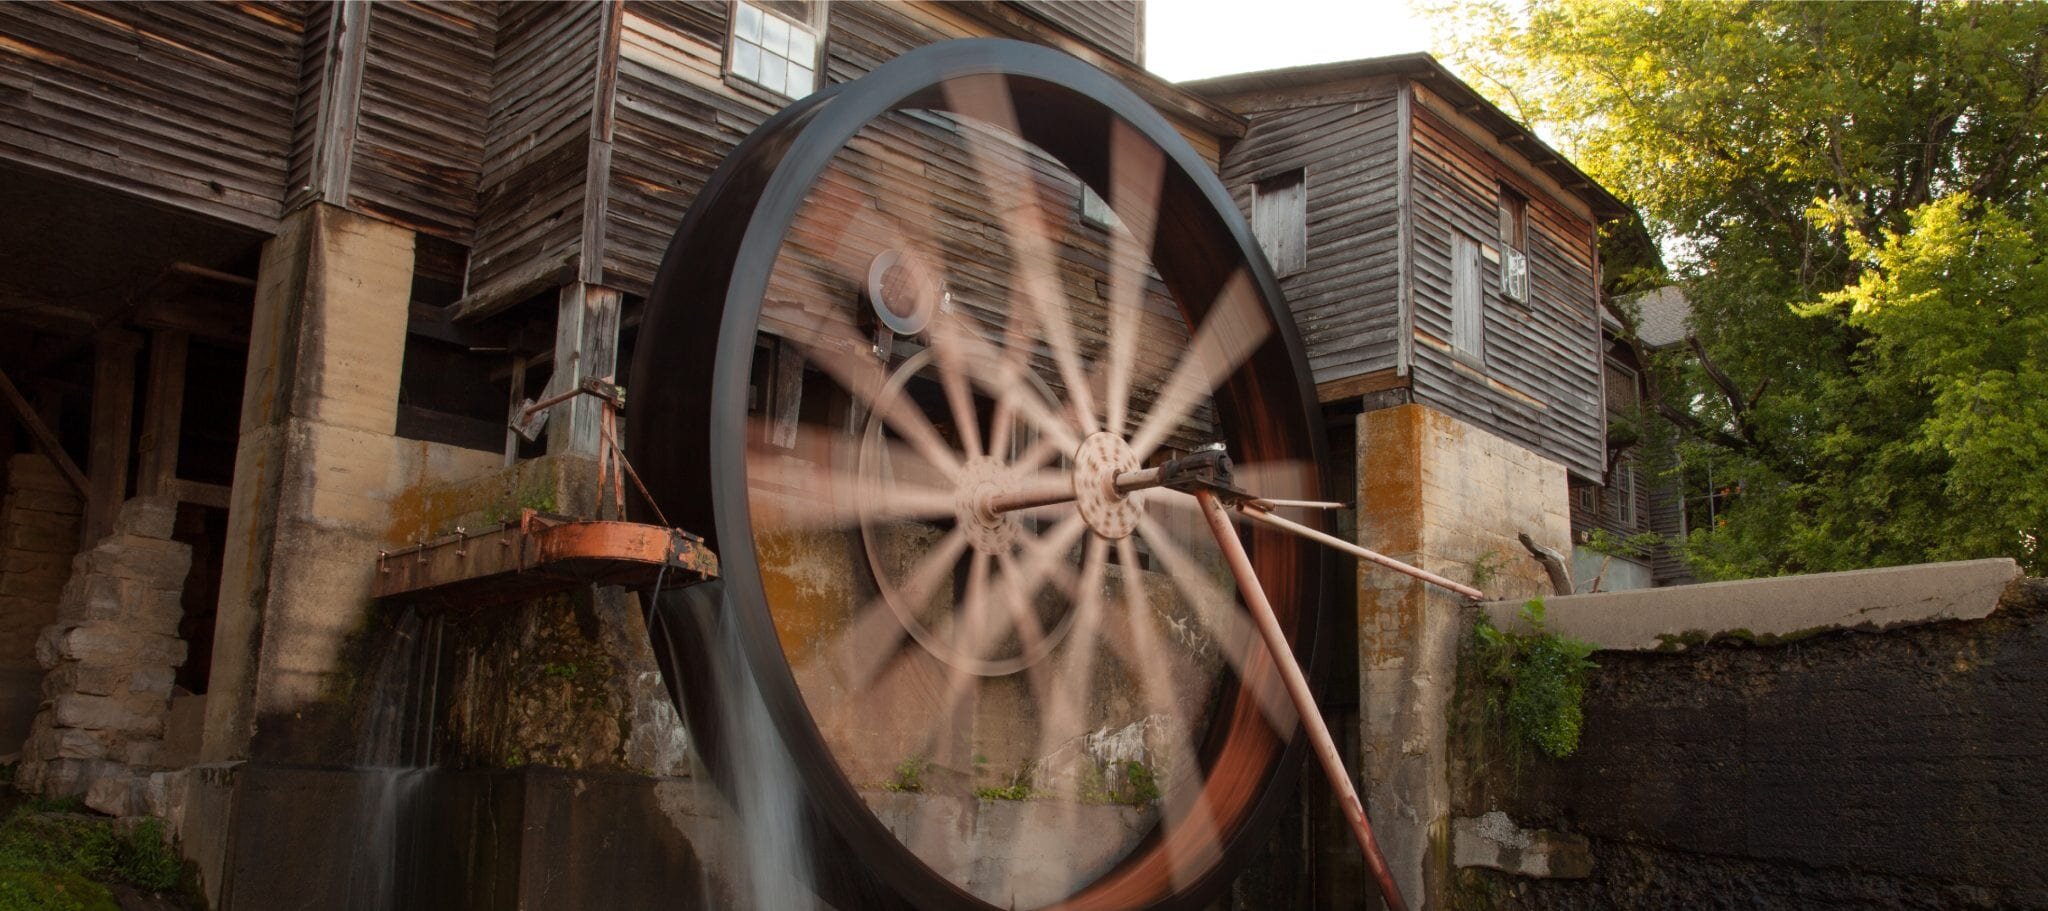 What is a Grist Mill? — The Old Mill